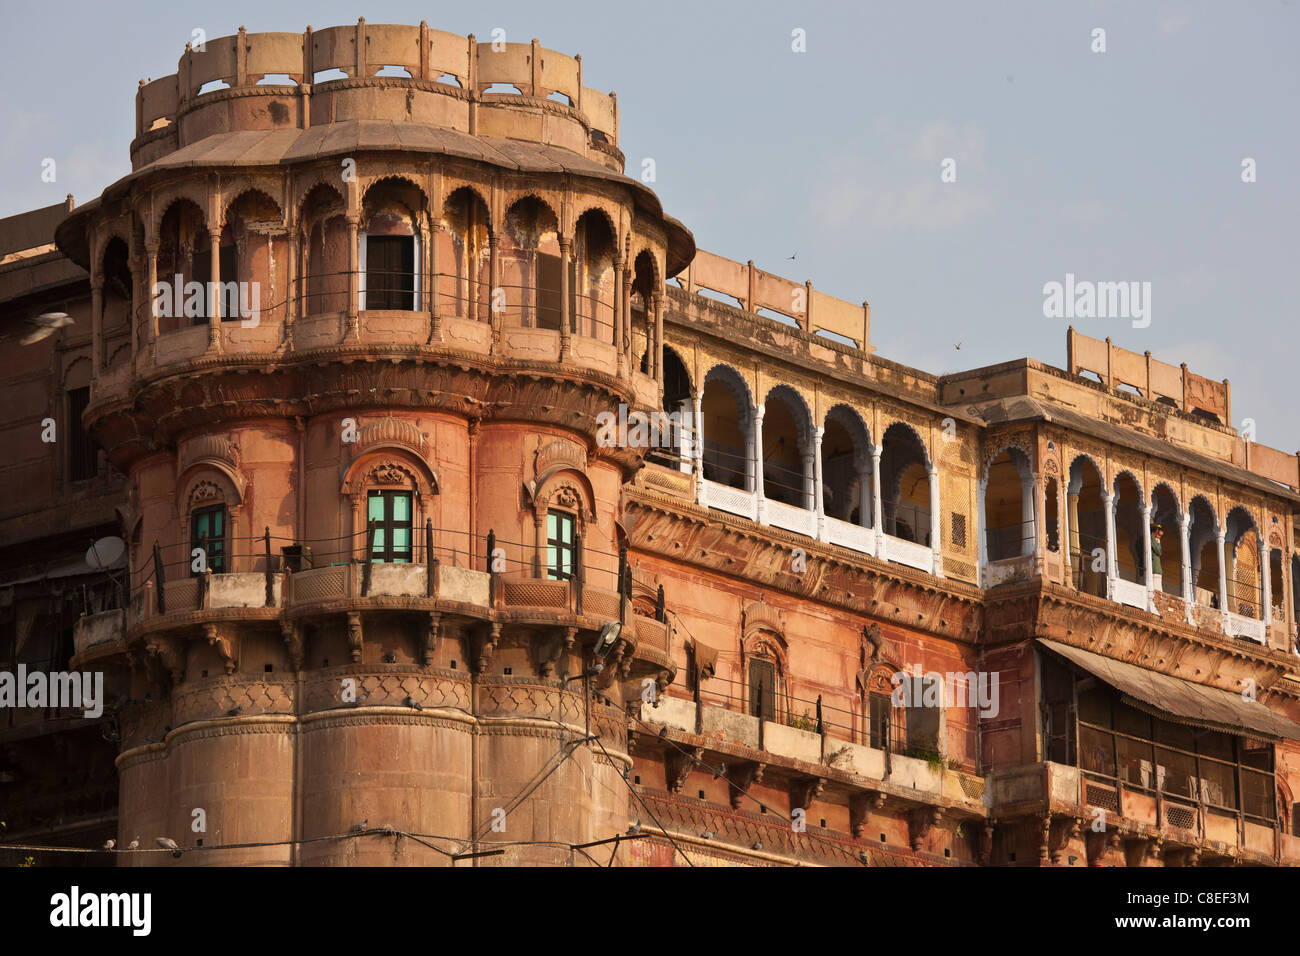 Traditional architecture ancient building fronting the famous Ghats by The Ganges River in Holy City of Varanasi, India Stock Photo